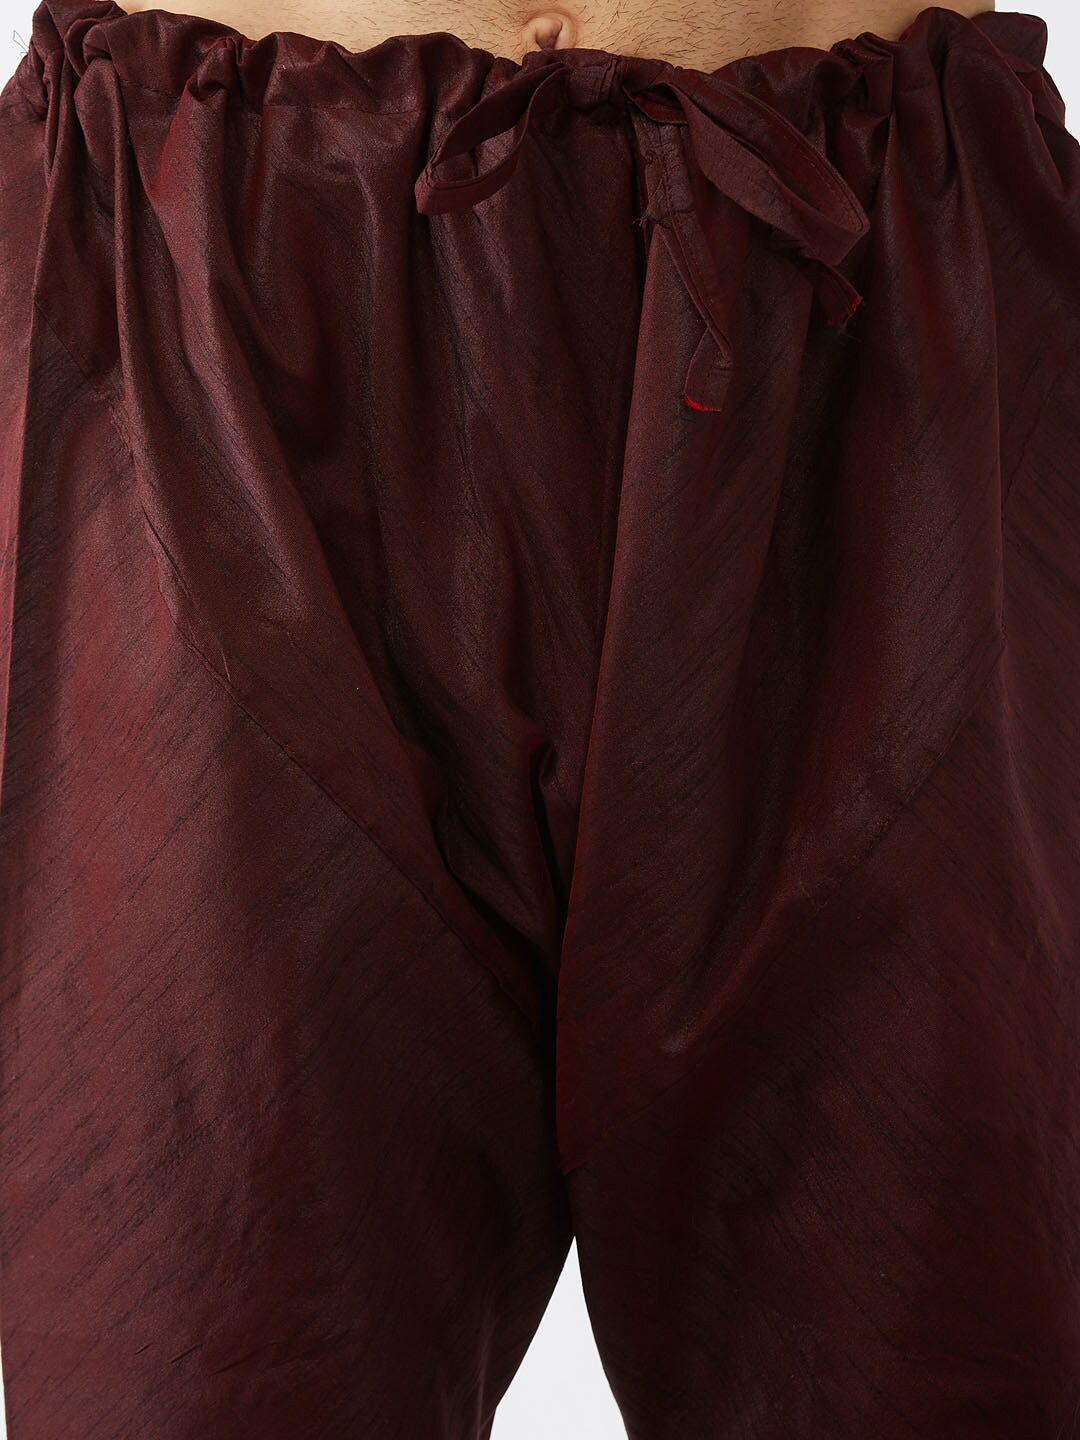 Burgundy Silk Blend Churidar Indian Clothing in Denver, CO, Aurora, CO, Boulder, CO, Fort Collins, CO, Colorado Springs, CO, Parker, CO, Highlands Ranch, CO, Cherry Creek, CO, Centennial, CO, and Longmont, CO. NATIONWIDE SHIPPING USA- India Fashion X